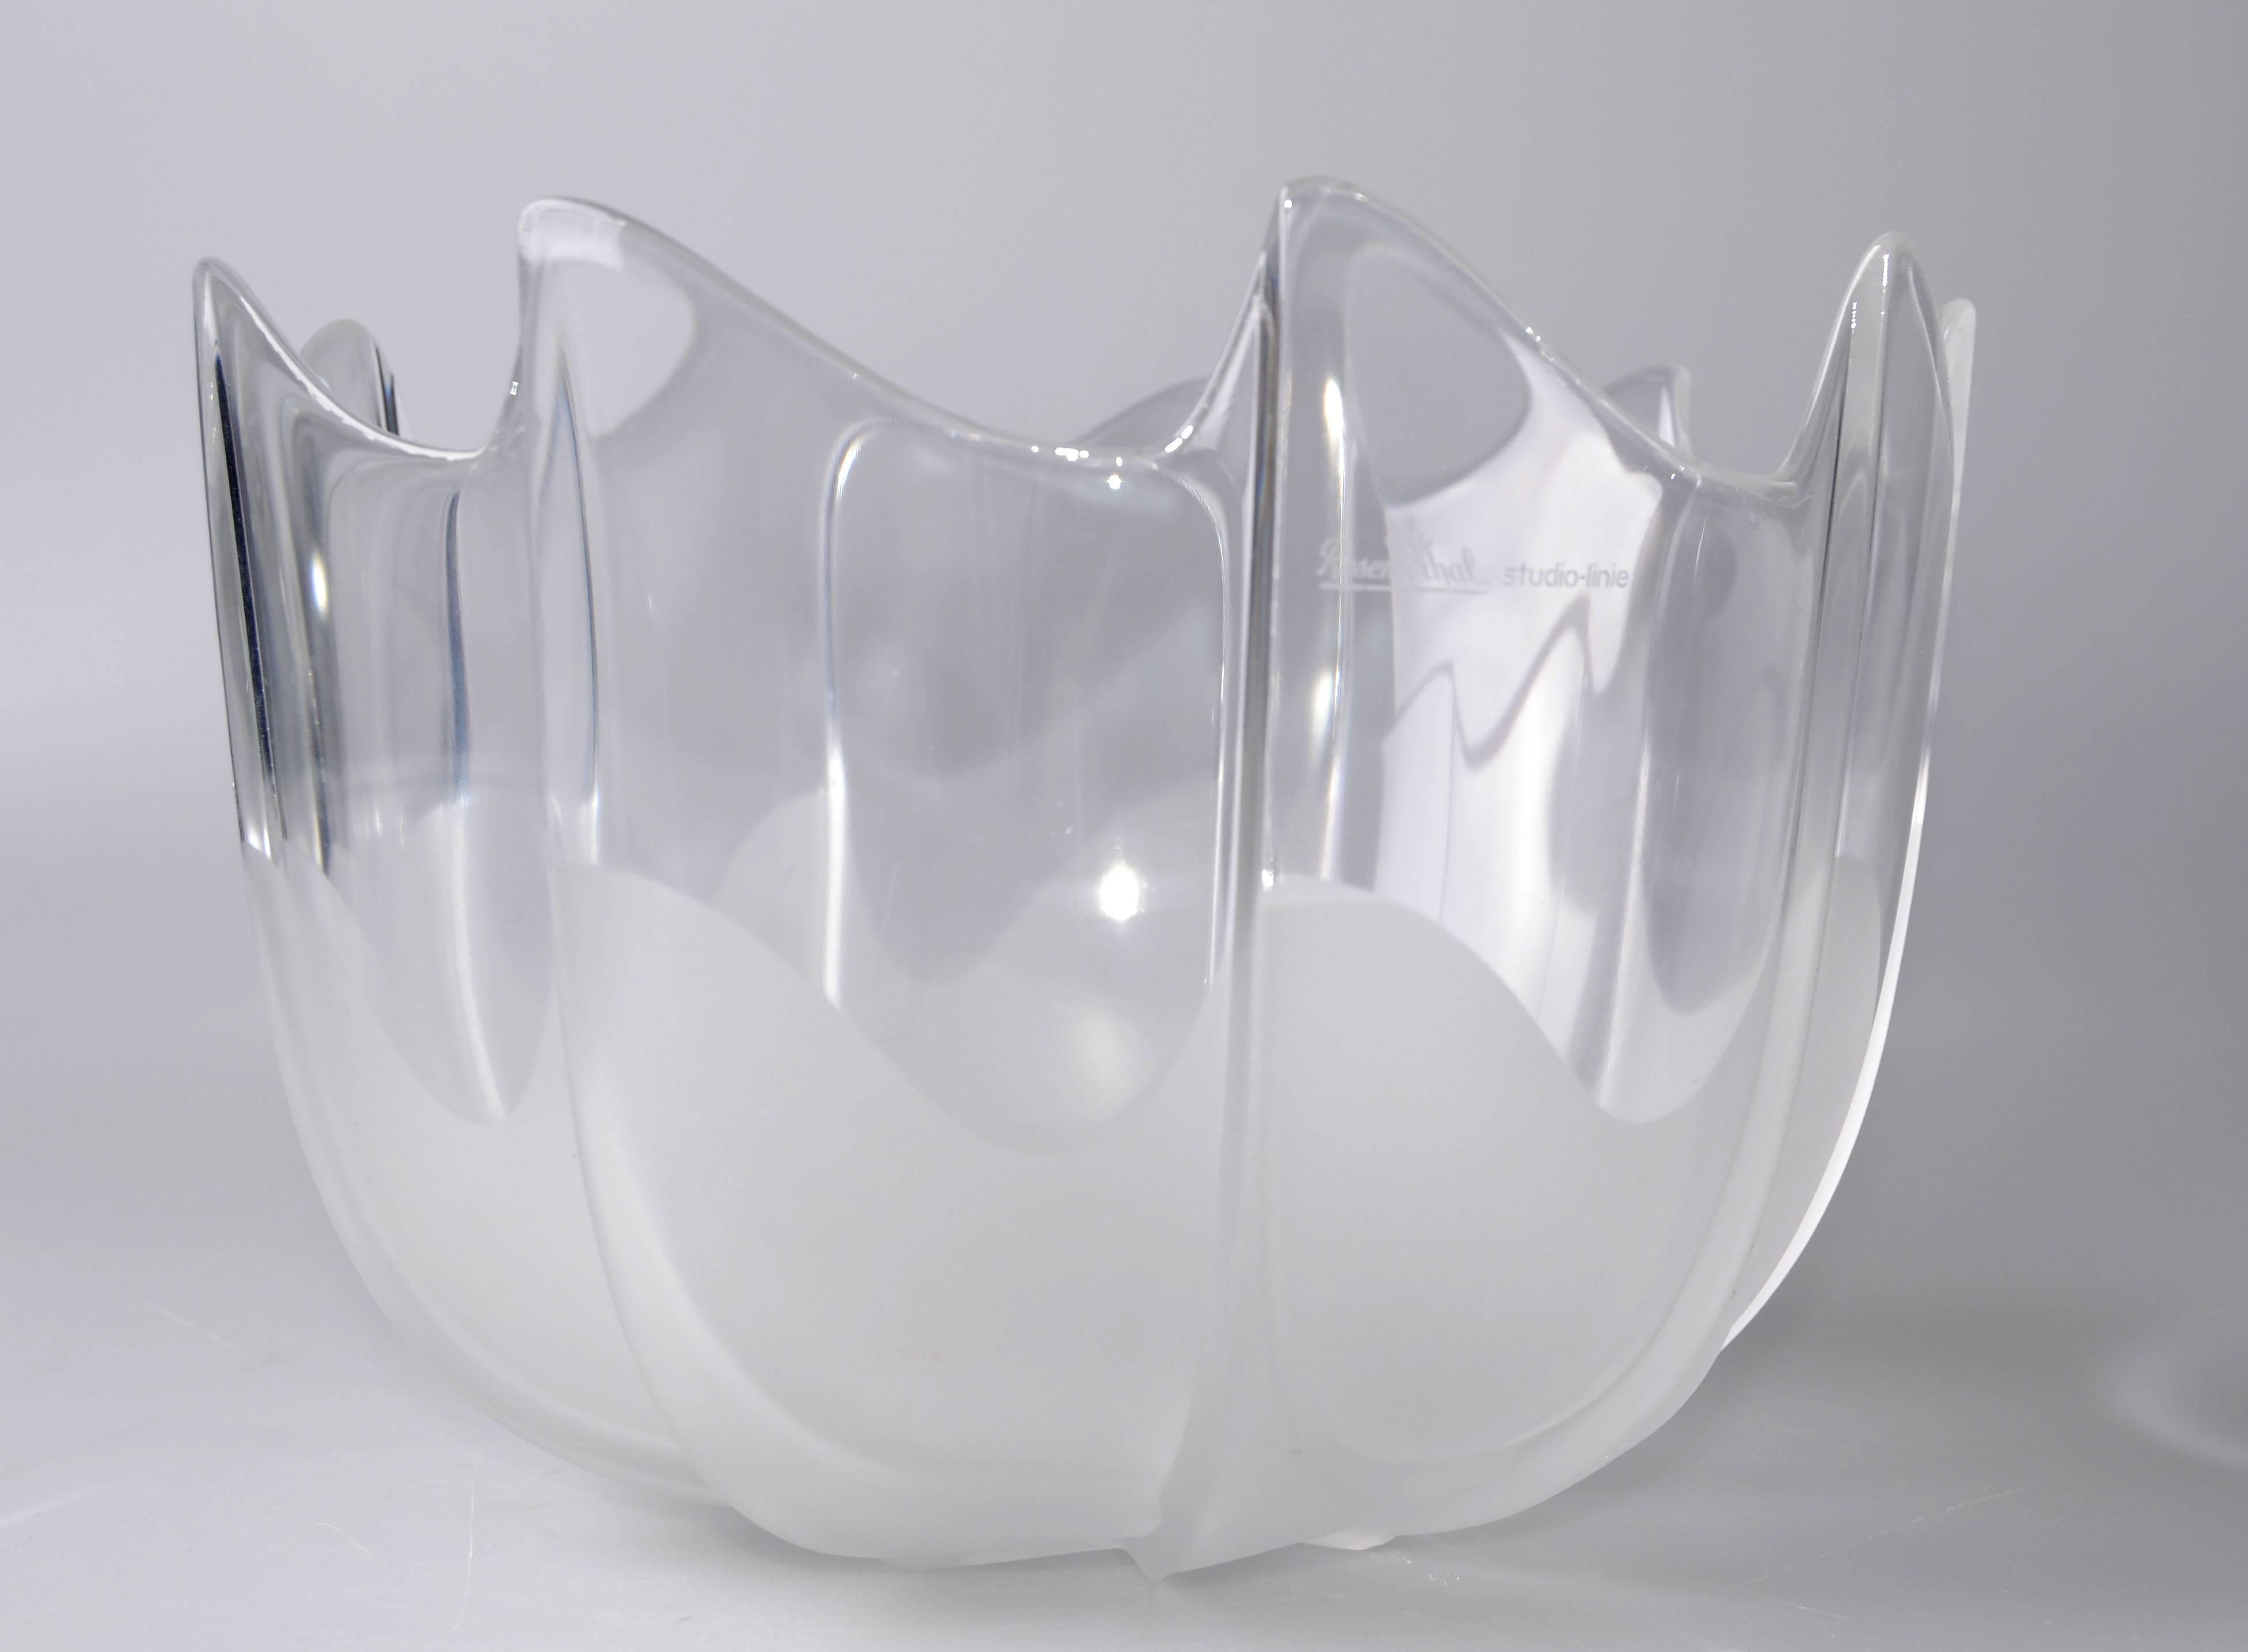 German Original Rosenthal Scalloped Frosted Crystal Glass Serving Bowl by Studio-Linie For Sale